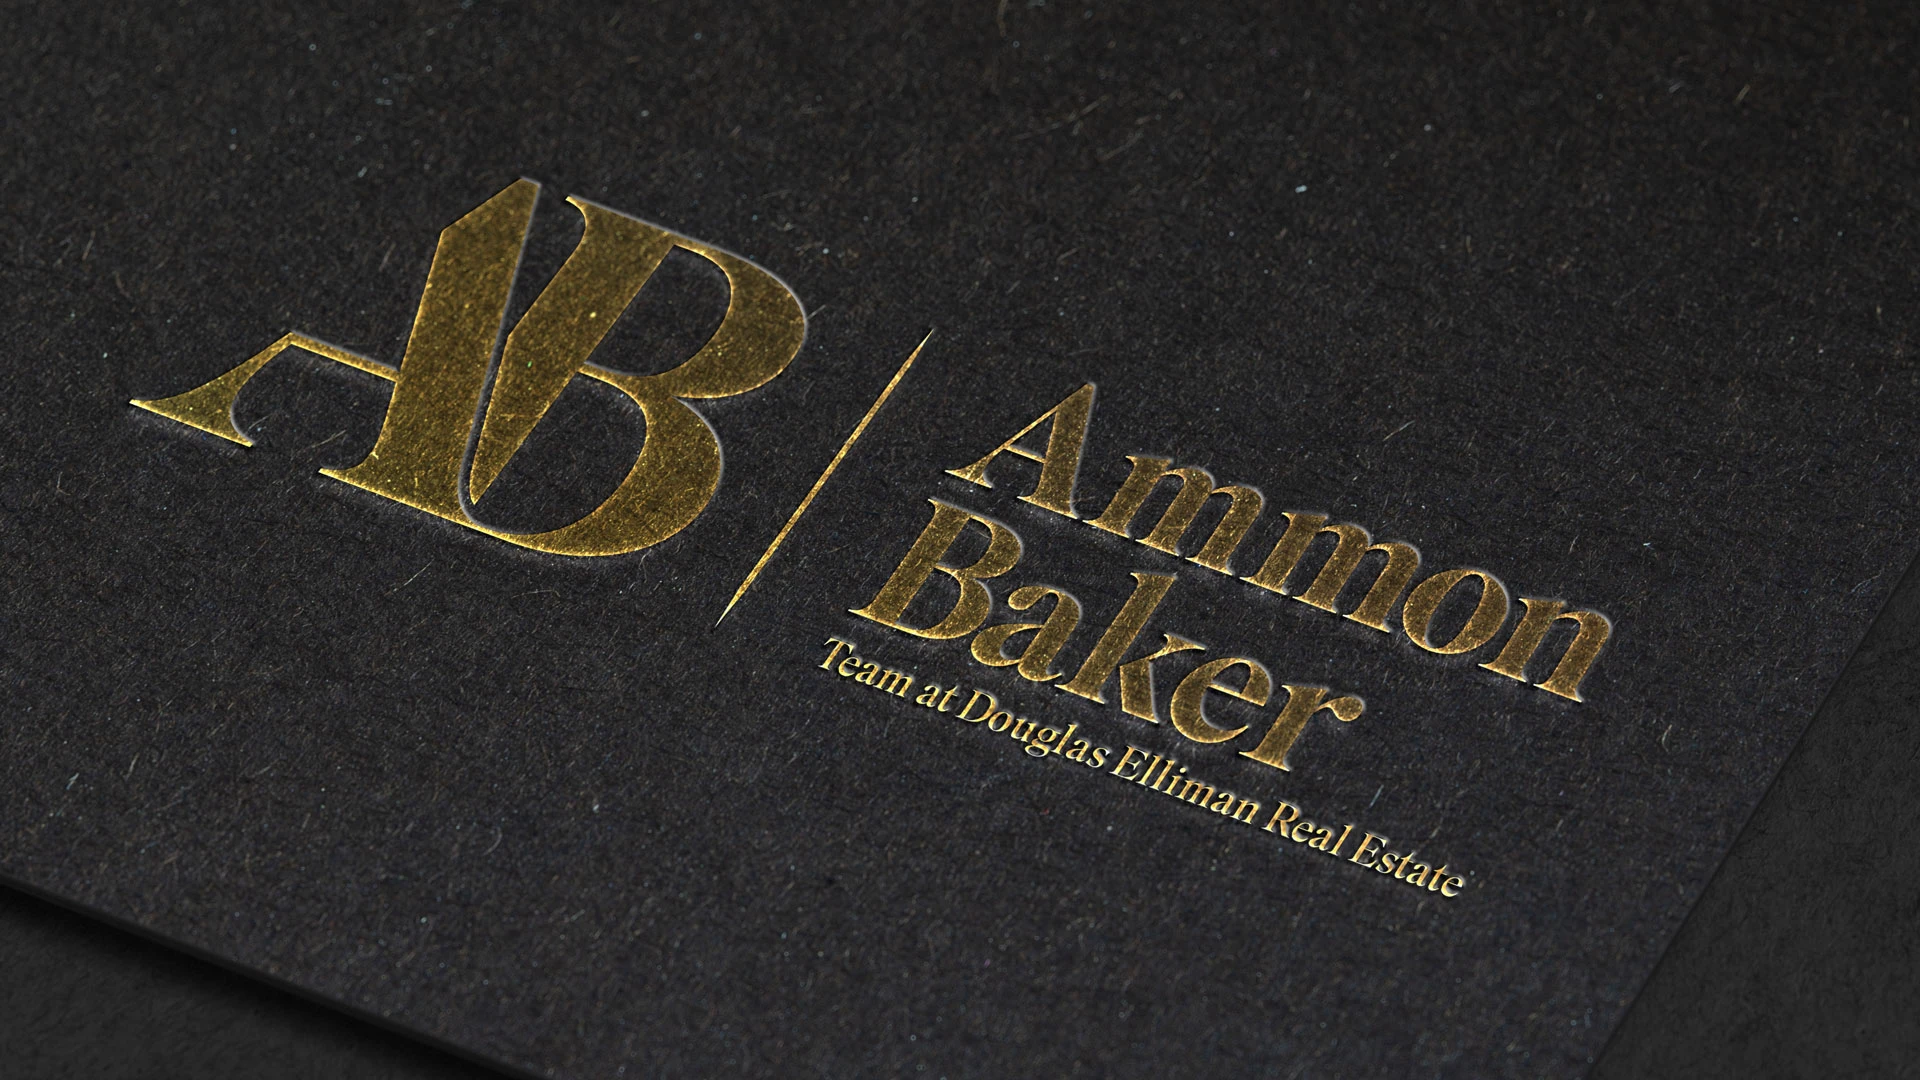 Mockup of Ammon Baker brand identity, Option 3 in the left lockup as an embossed gold foil on dark paper.